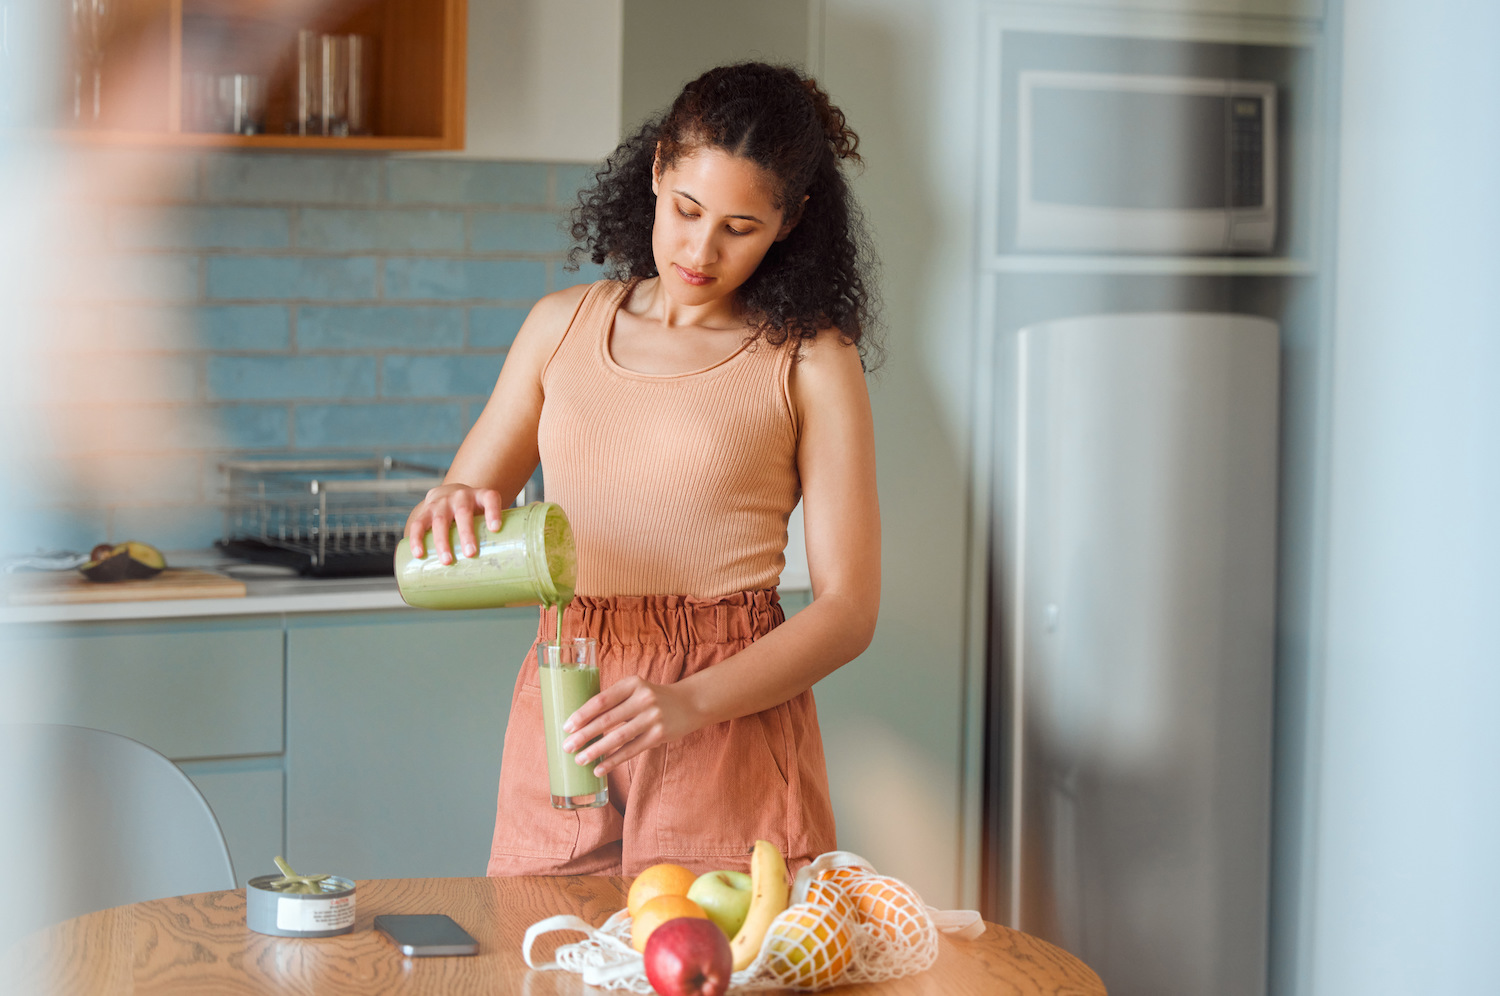 Healthy, nutrition and wellness lifestyle young woman making fresh, green detox fruit smoothie